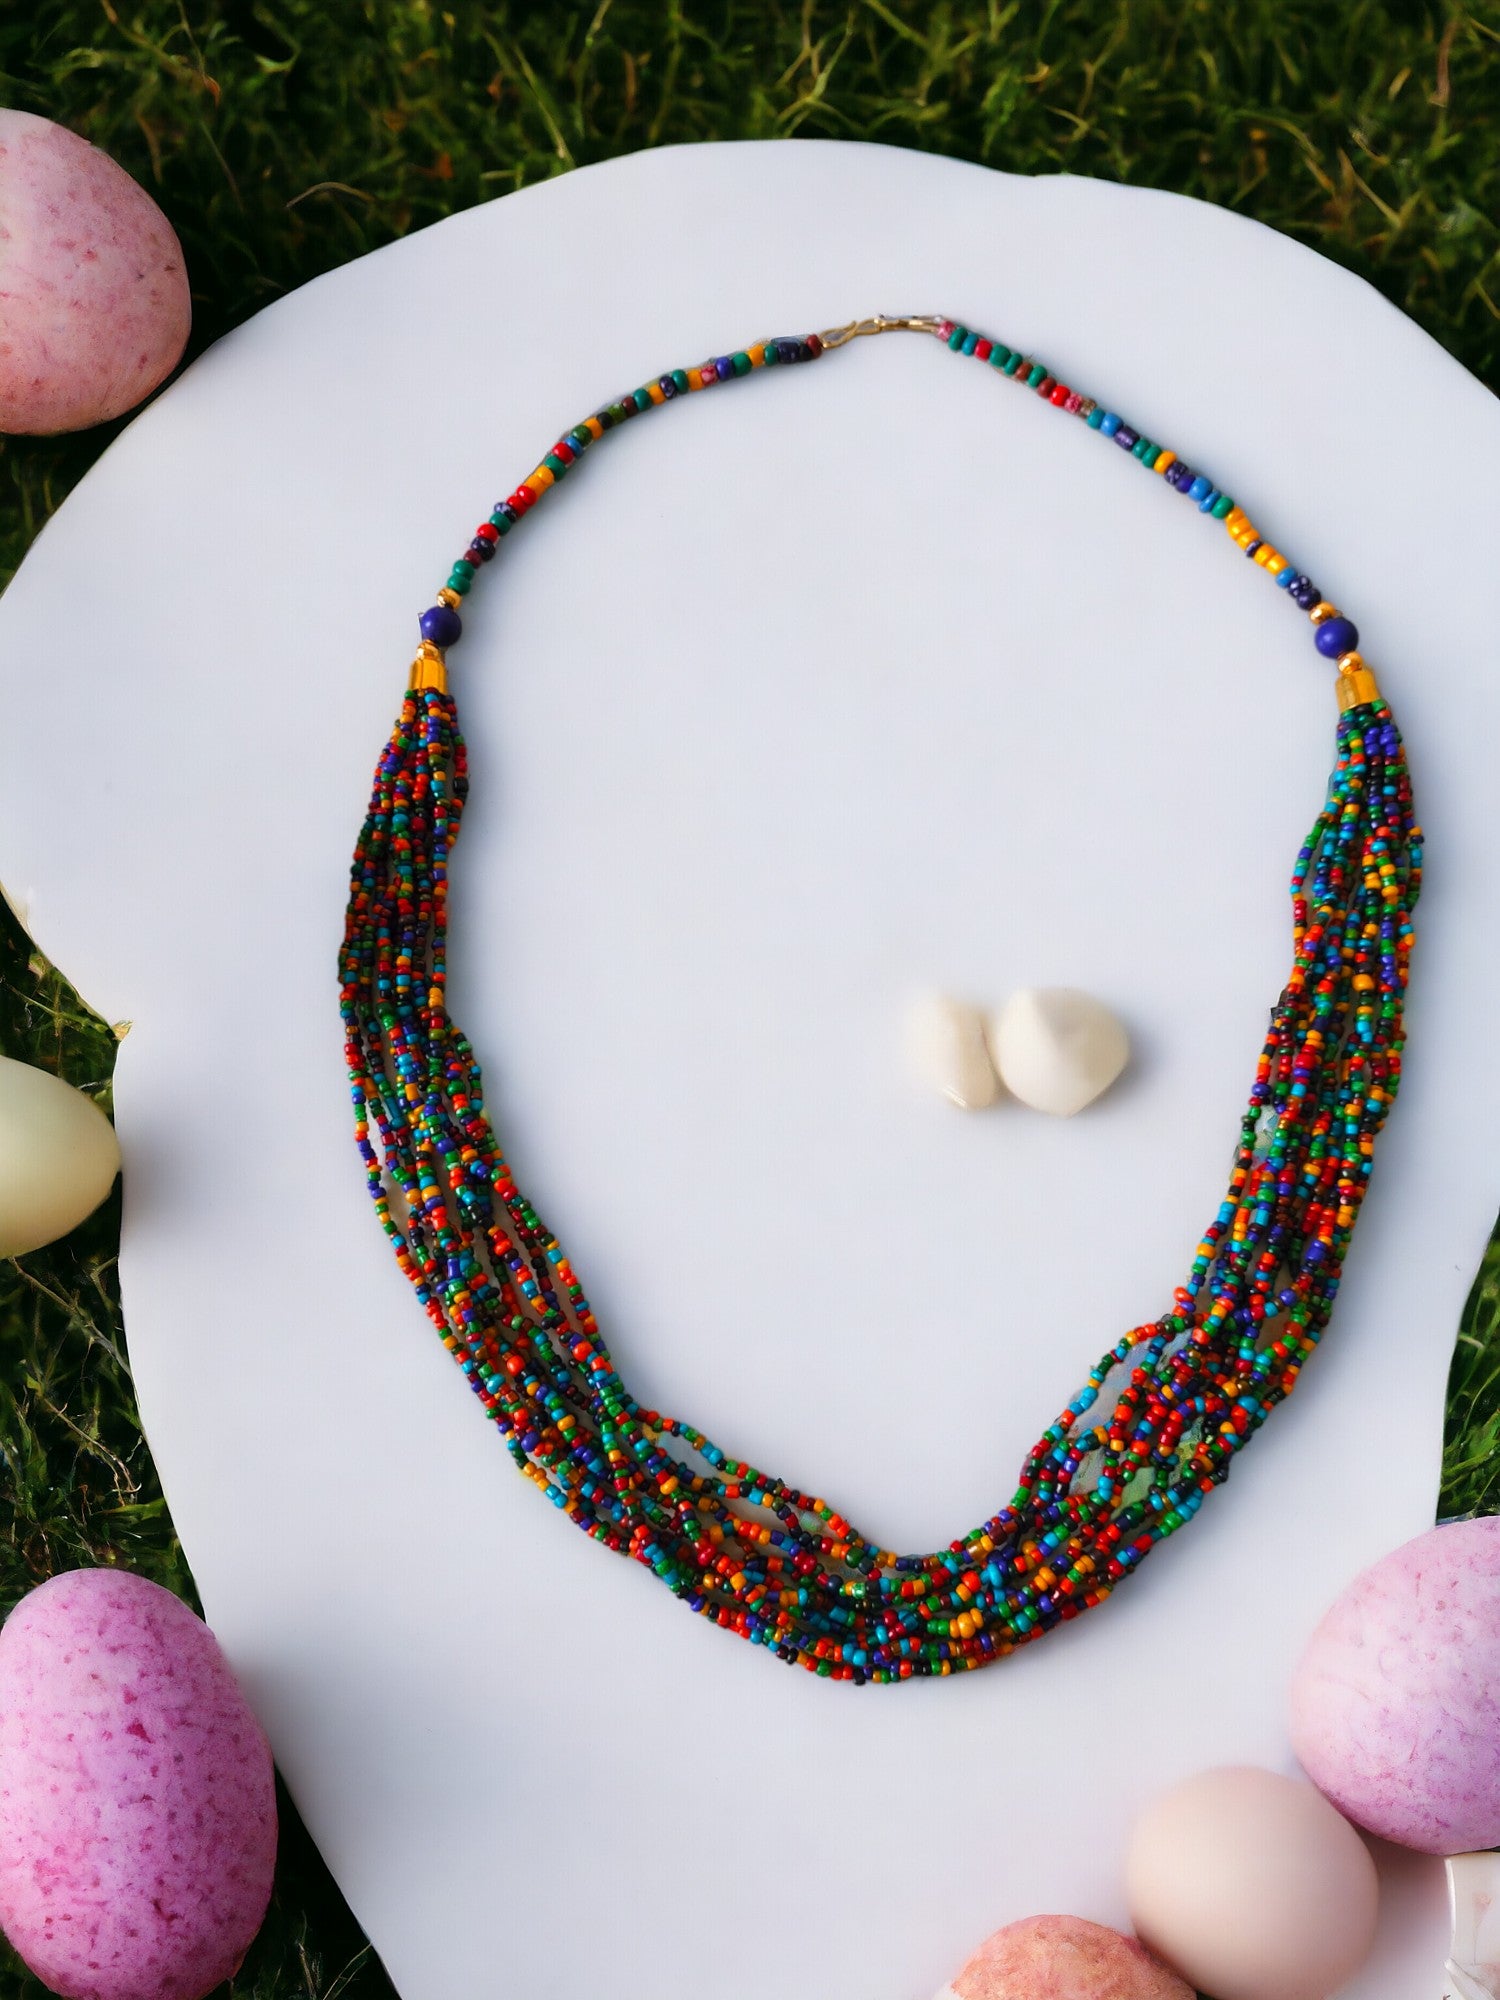 Colour Carnival: Handmade Multi-Layered Beaded Necklace(12 Layers)